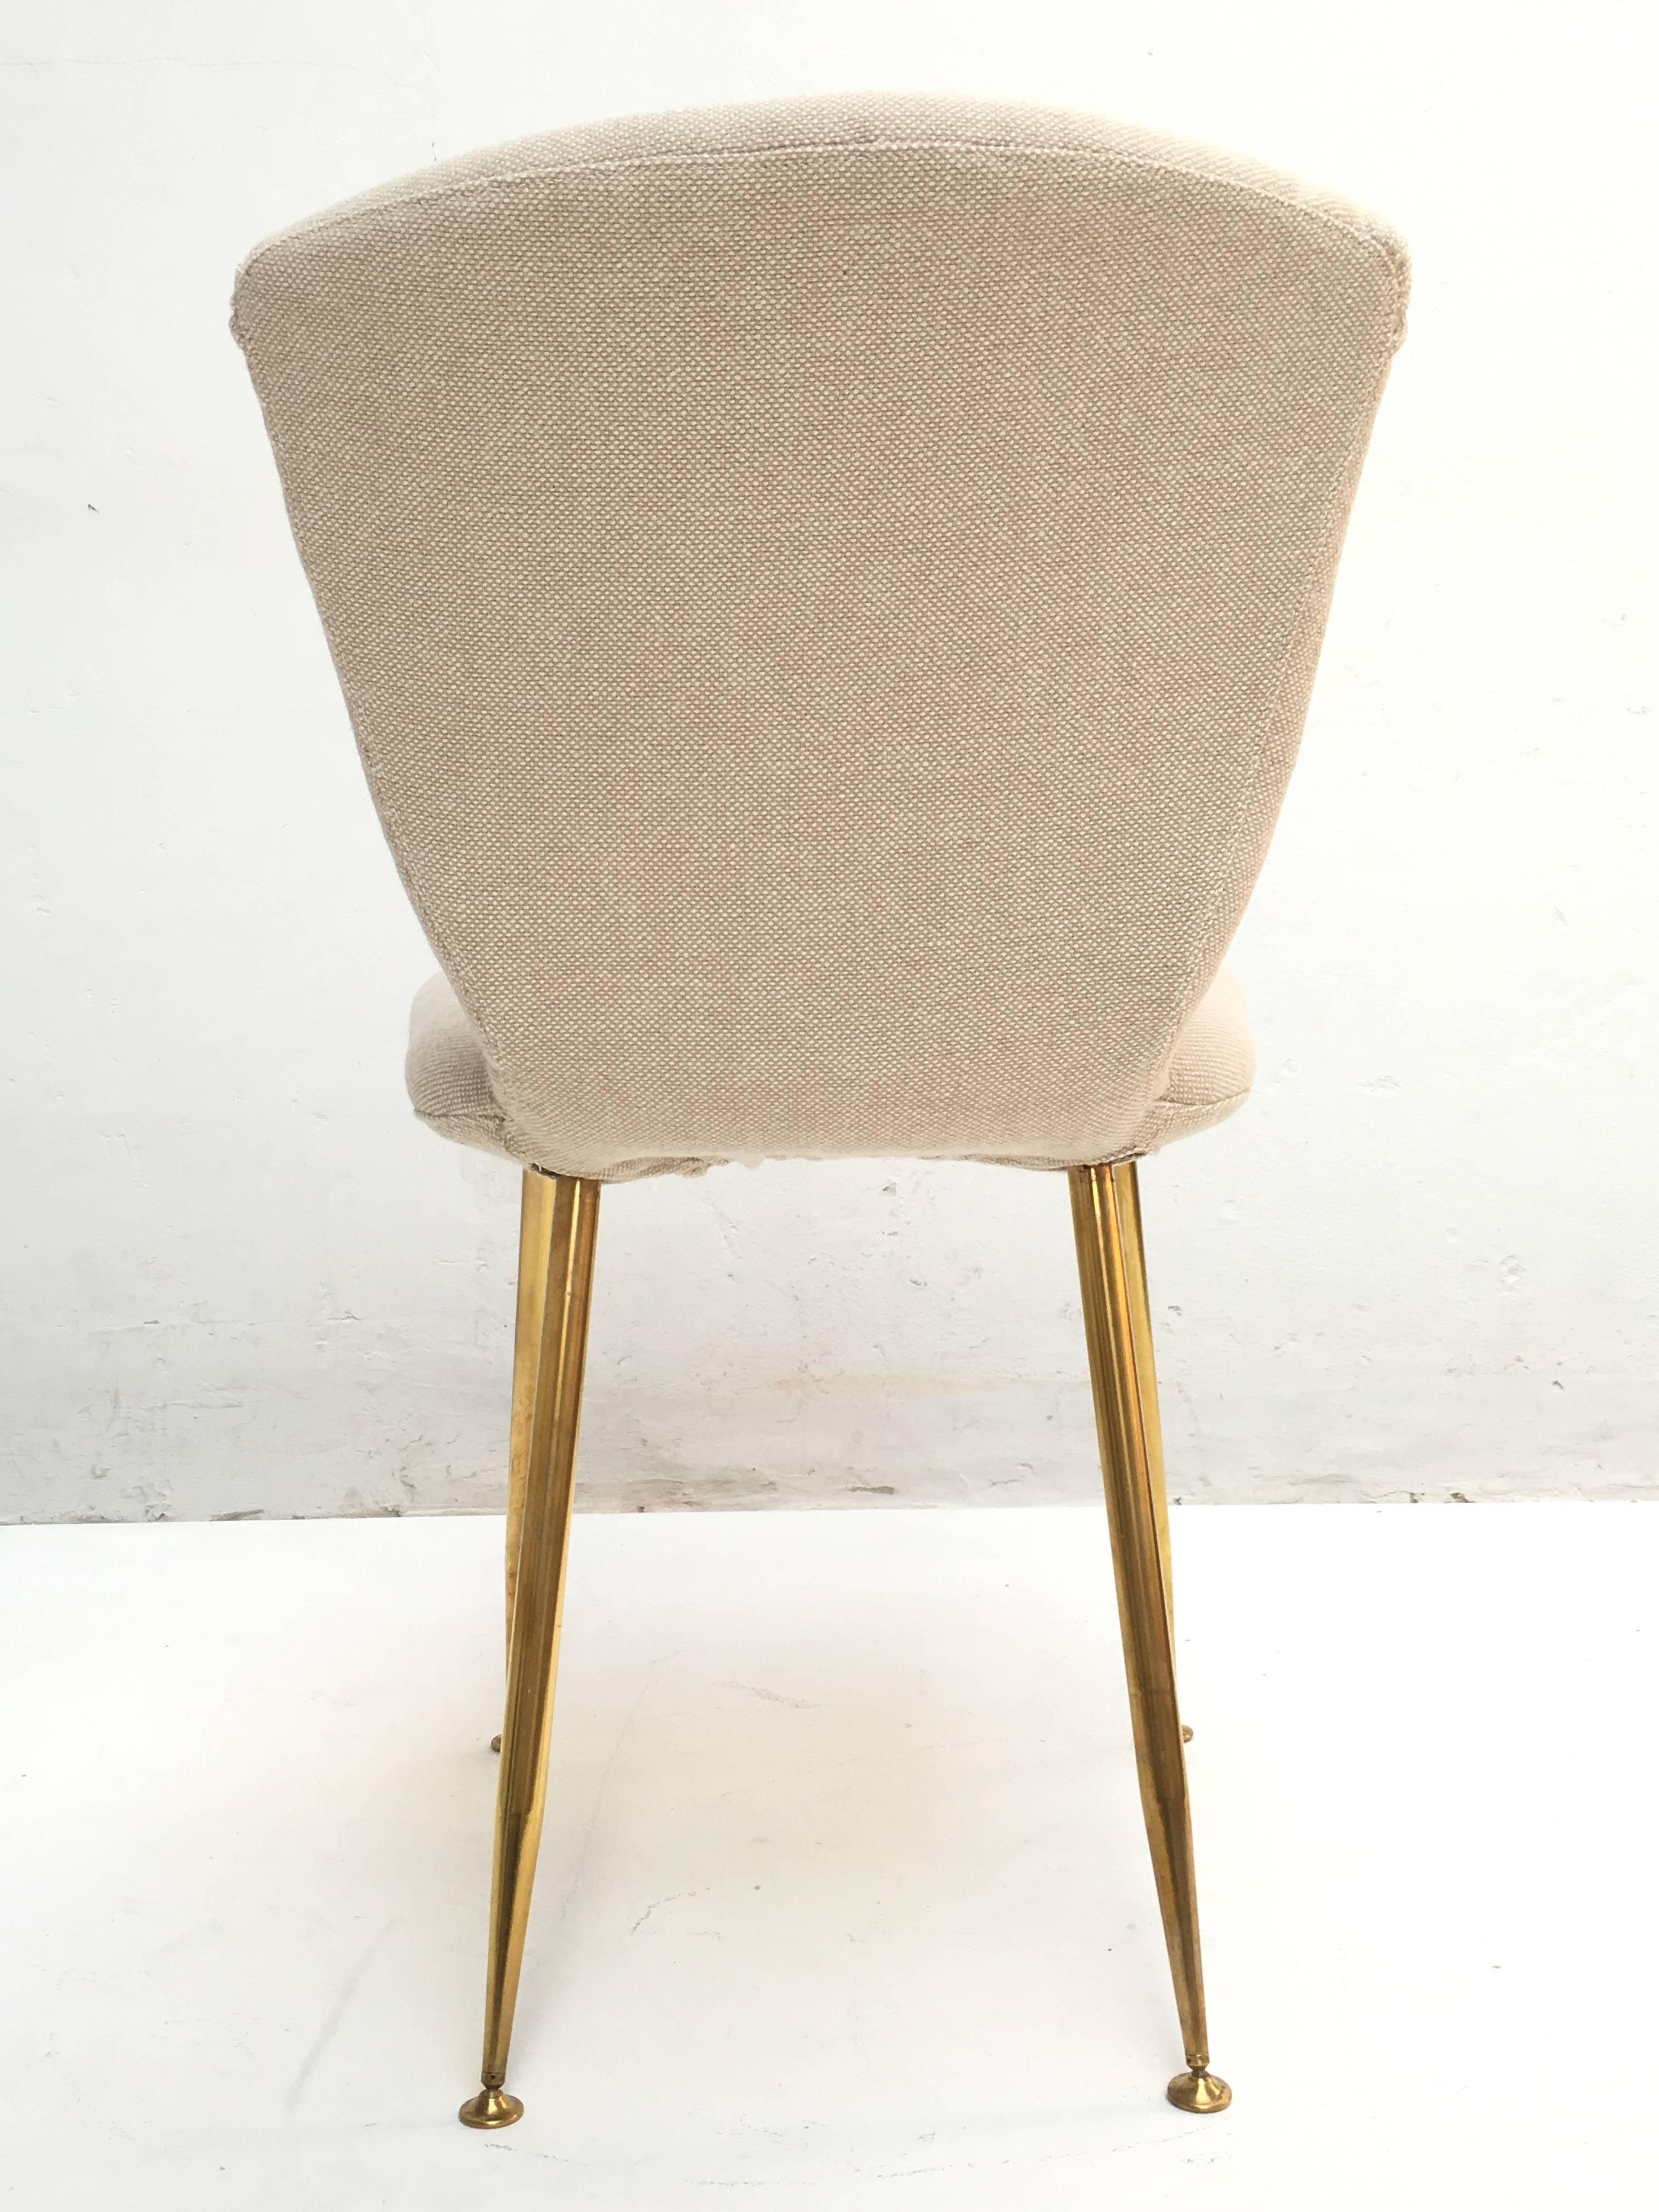 12 dining chairs by Louis Sognot for ARFLEX, 1959. Brass legs, Upholstery restored 3